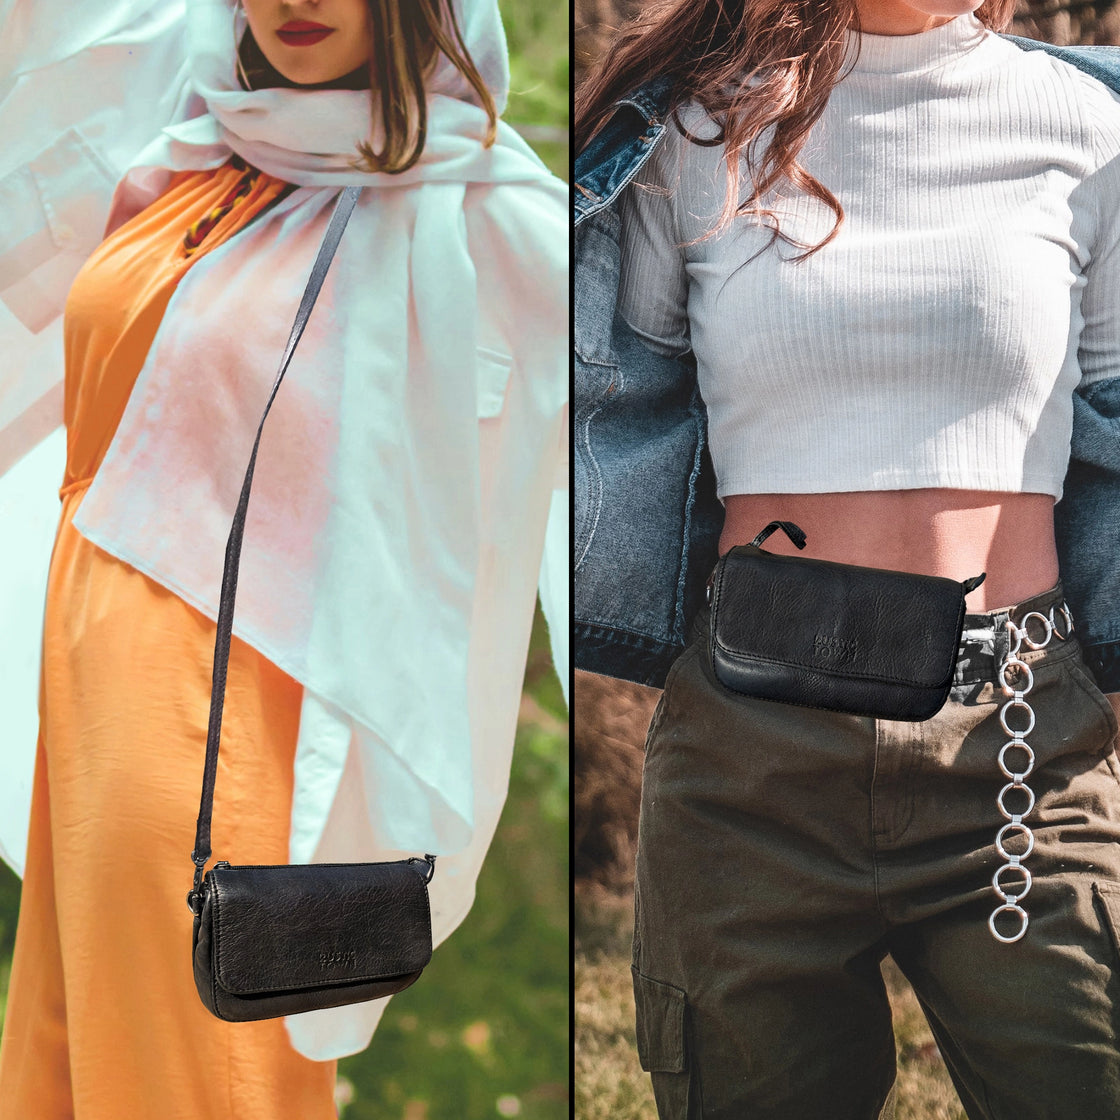 Waist bag black color leather waist pouch for women stylish daily use bag  for girls waterproof mobile carry purse bag